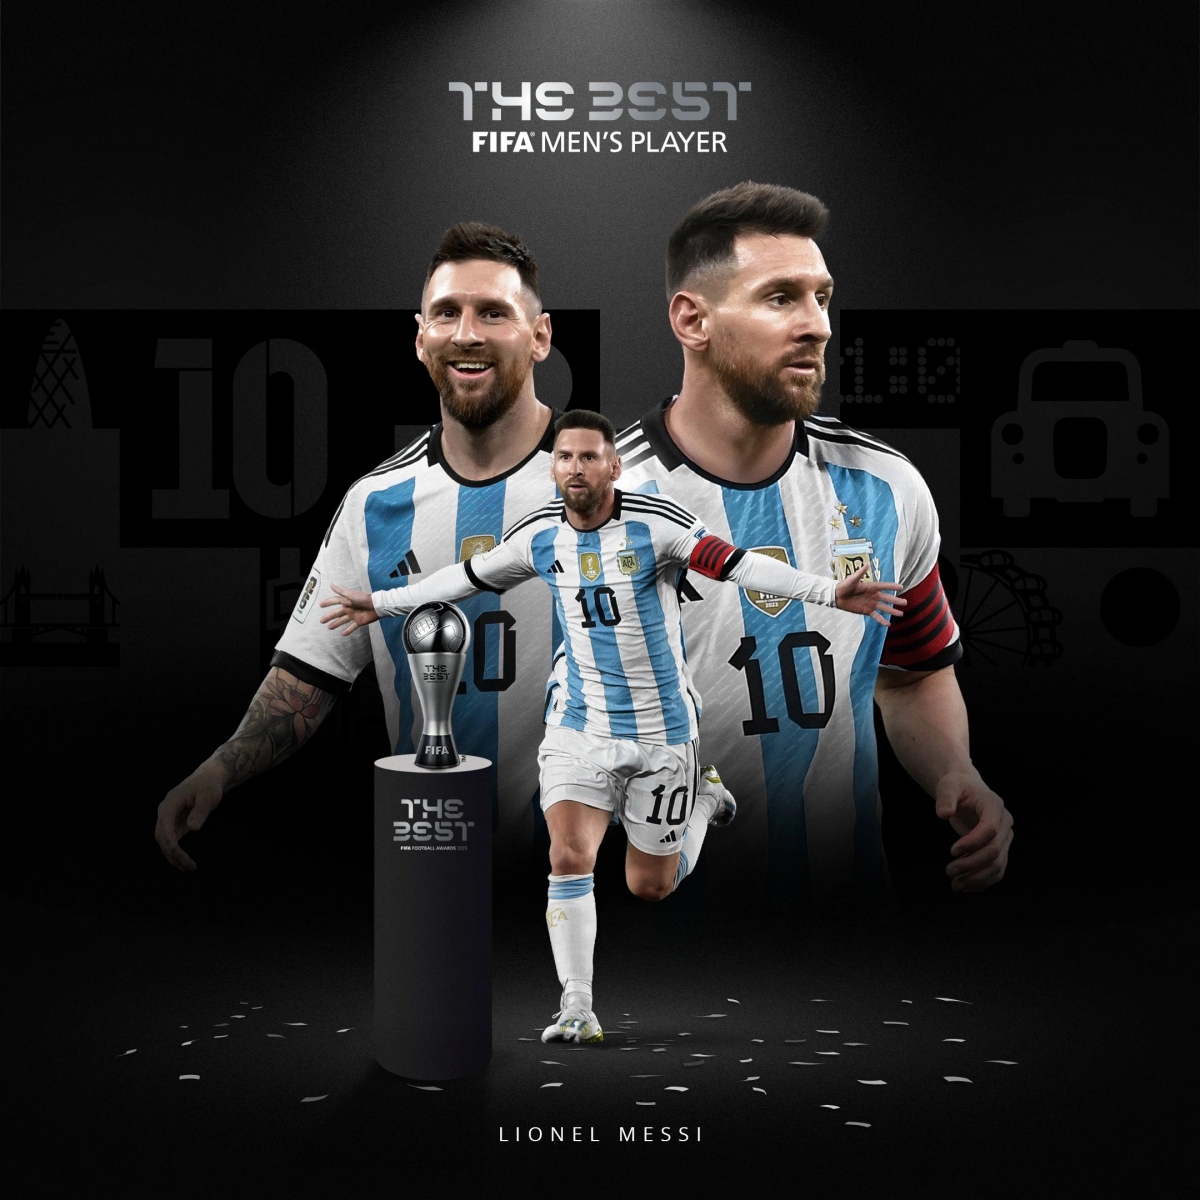 lionel messi gianh danh hieu the best 2023 day tranh cai hinh anh 1